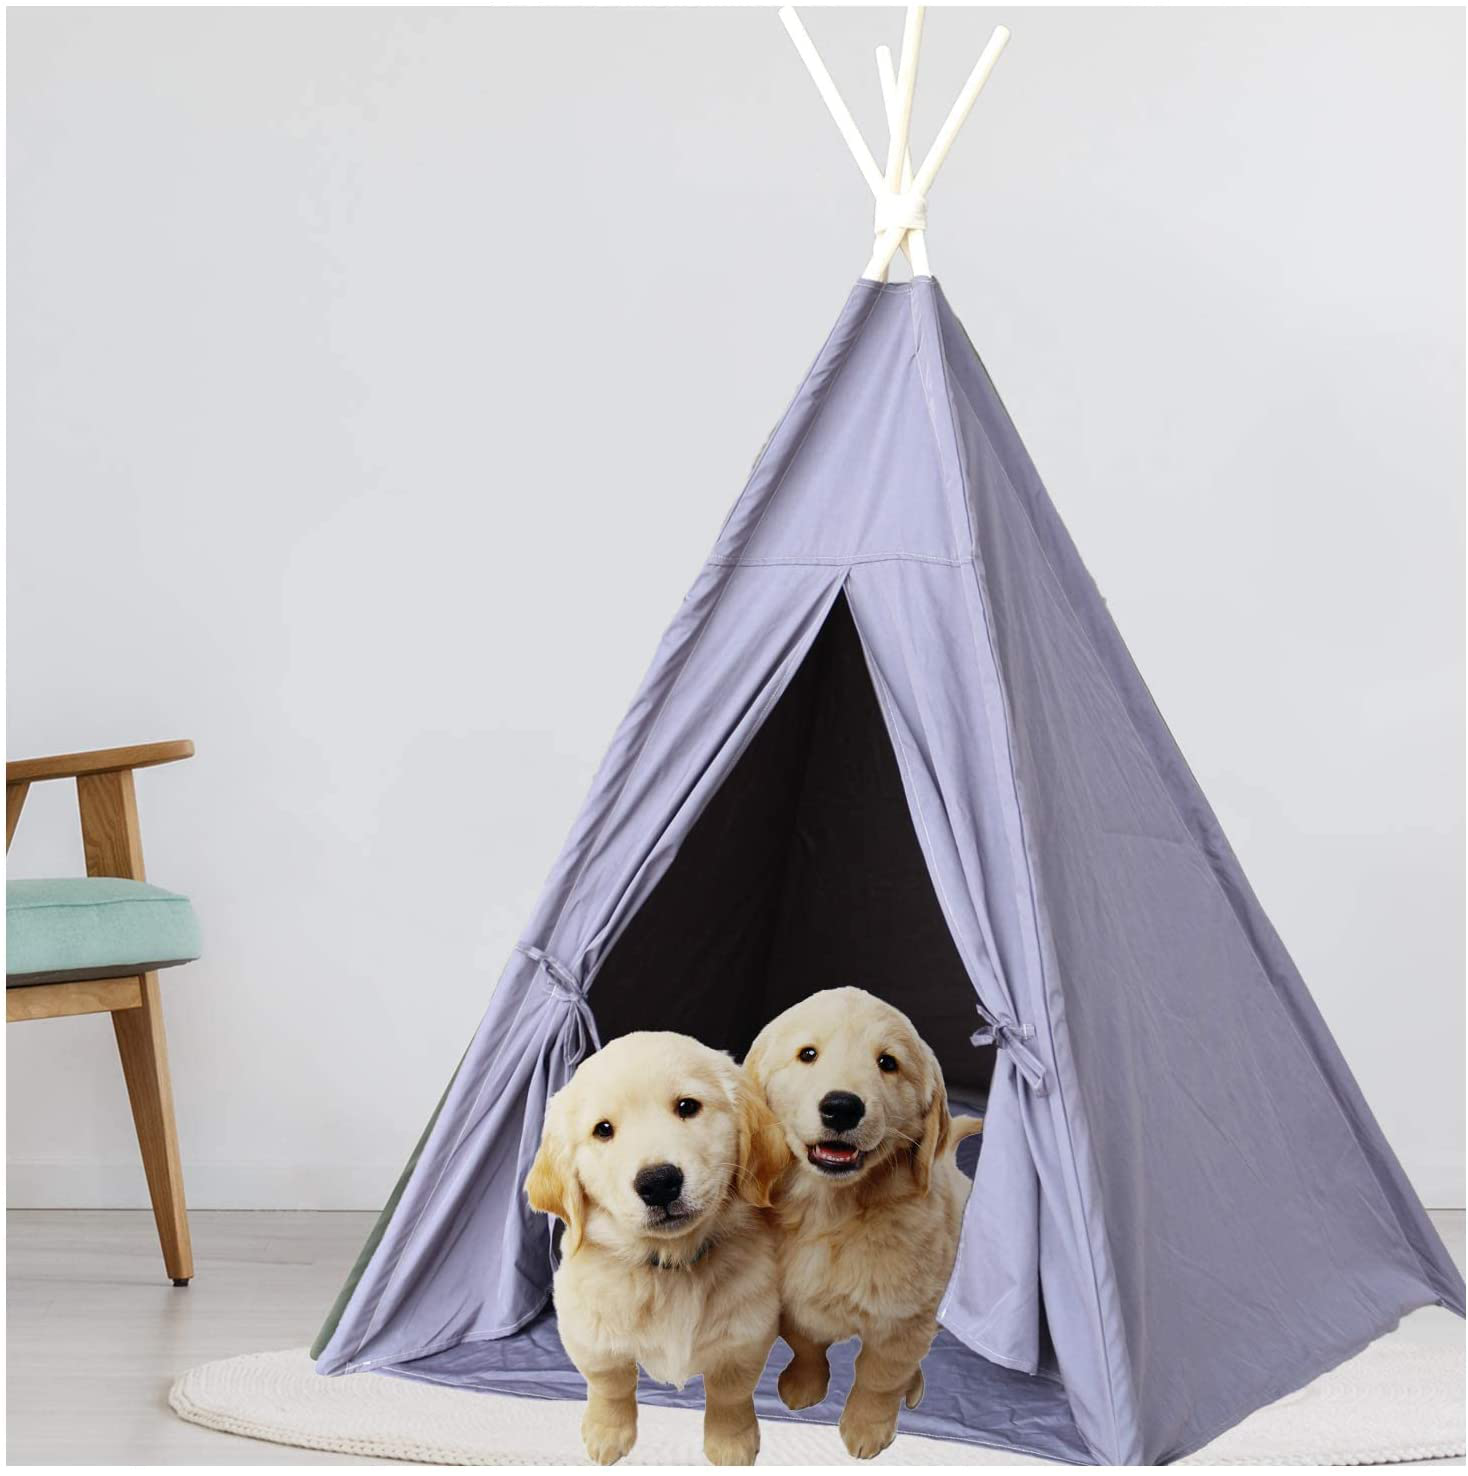 Ukadou Dog Teepee Medium for Pet Teepee Dog Tents for Large Dogs, 36Inch Pet Teepee with Floor Mat, Portable Dog House with Fixator and Blackboard